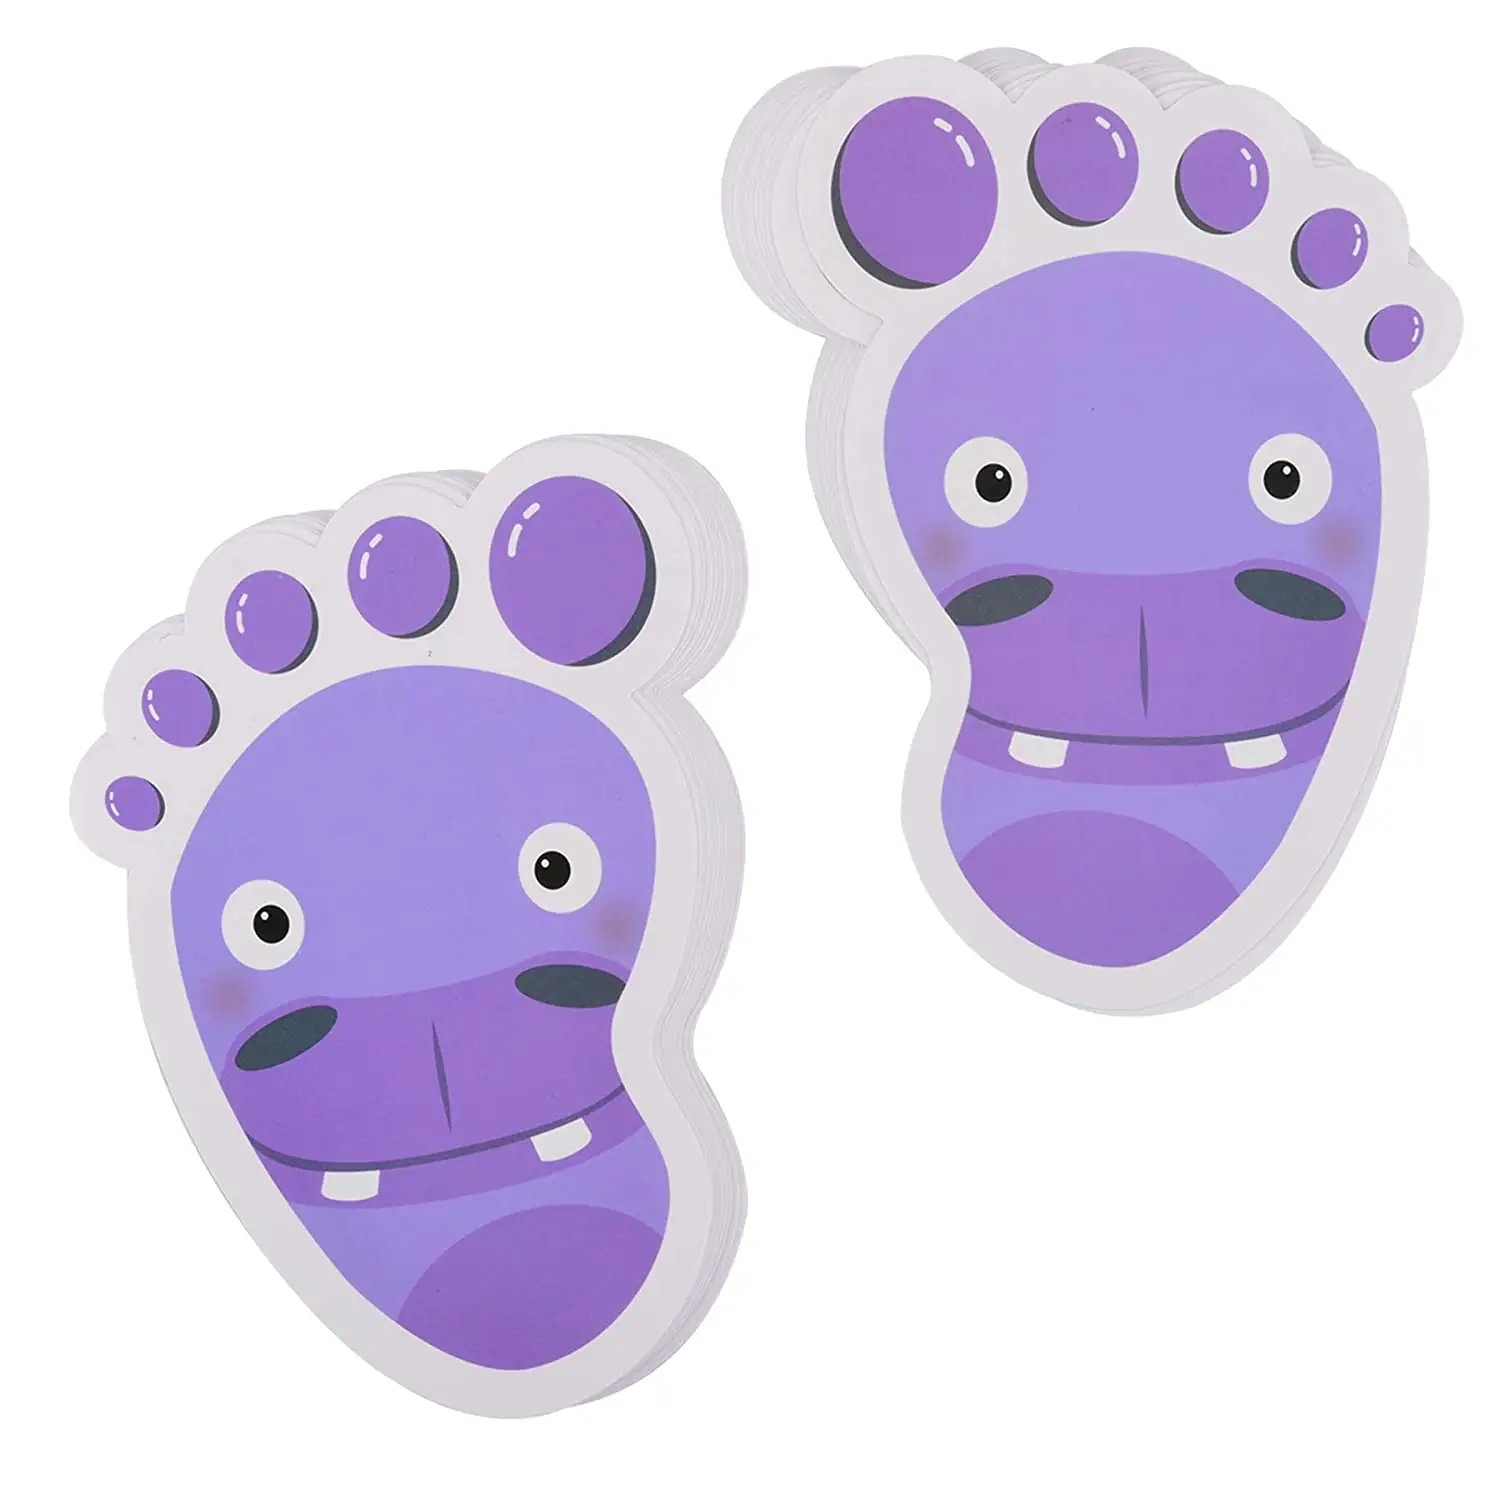 Self-Adhesive Kids Footprint Stickers Cartoon Guide Floor Decals Social Distance Cute Smile Floor Stickers For Kids Room Party